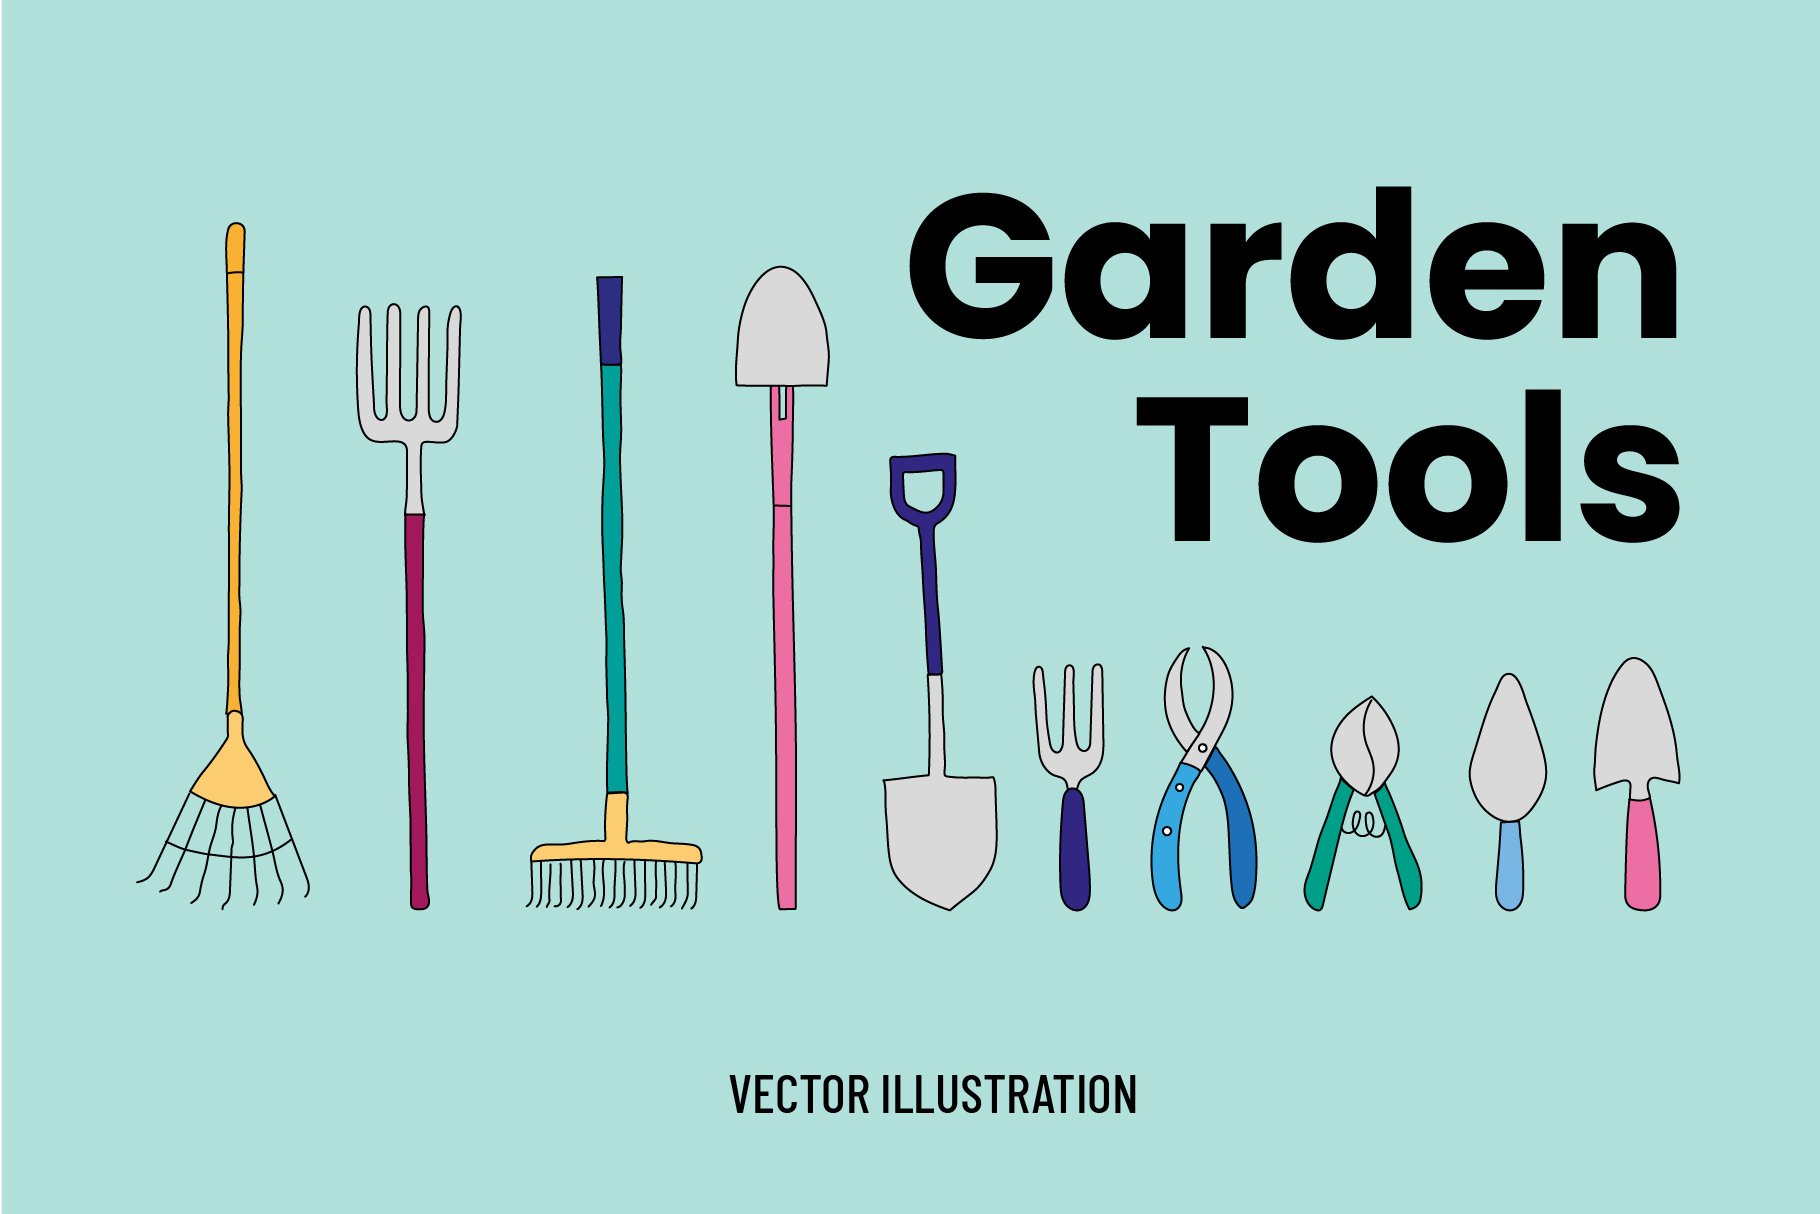 Garden Tools cover image.